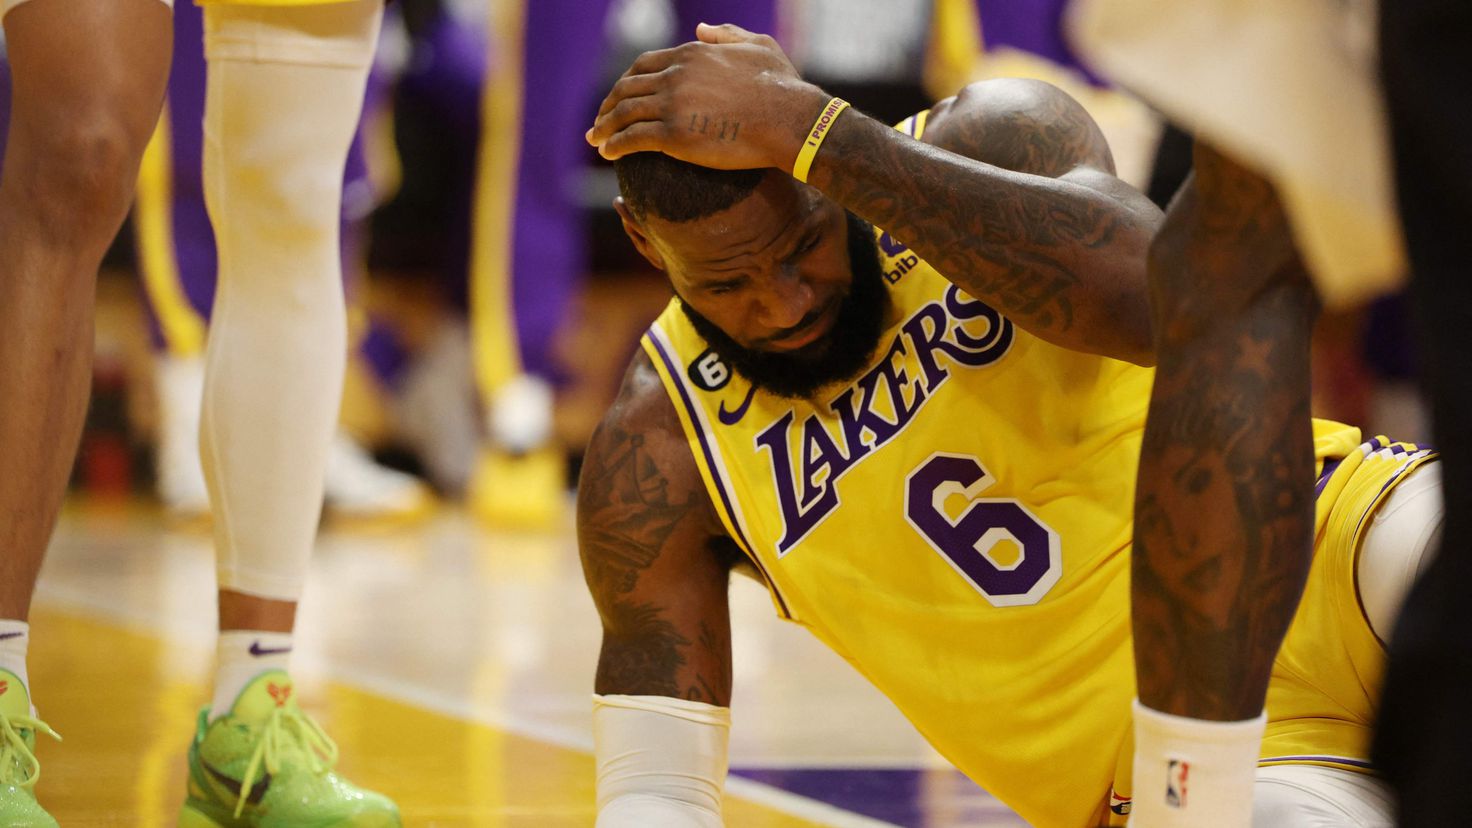 LeBron James played in the playoffs with a foot injury that needs surgery
